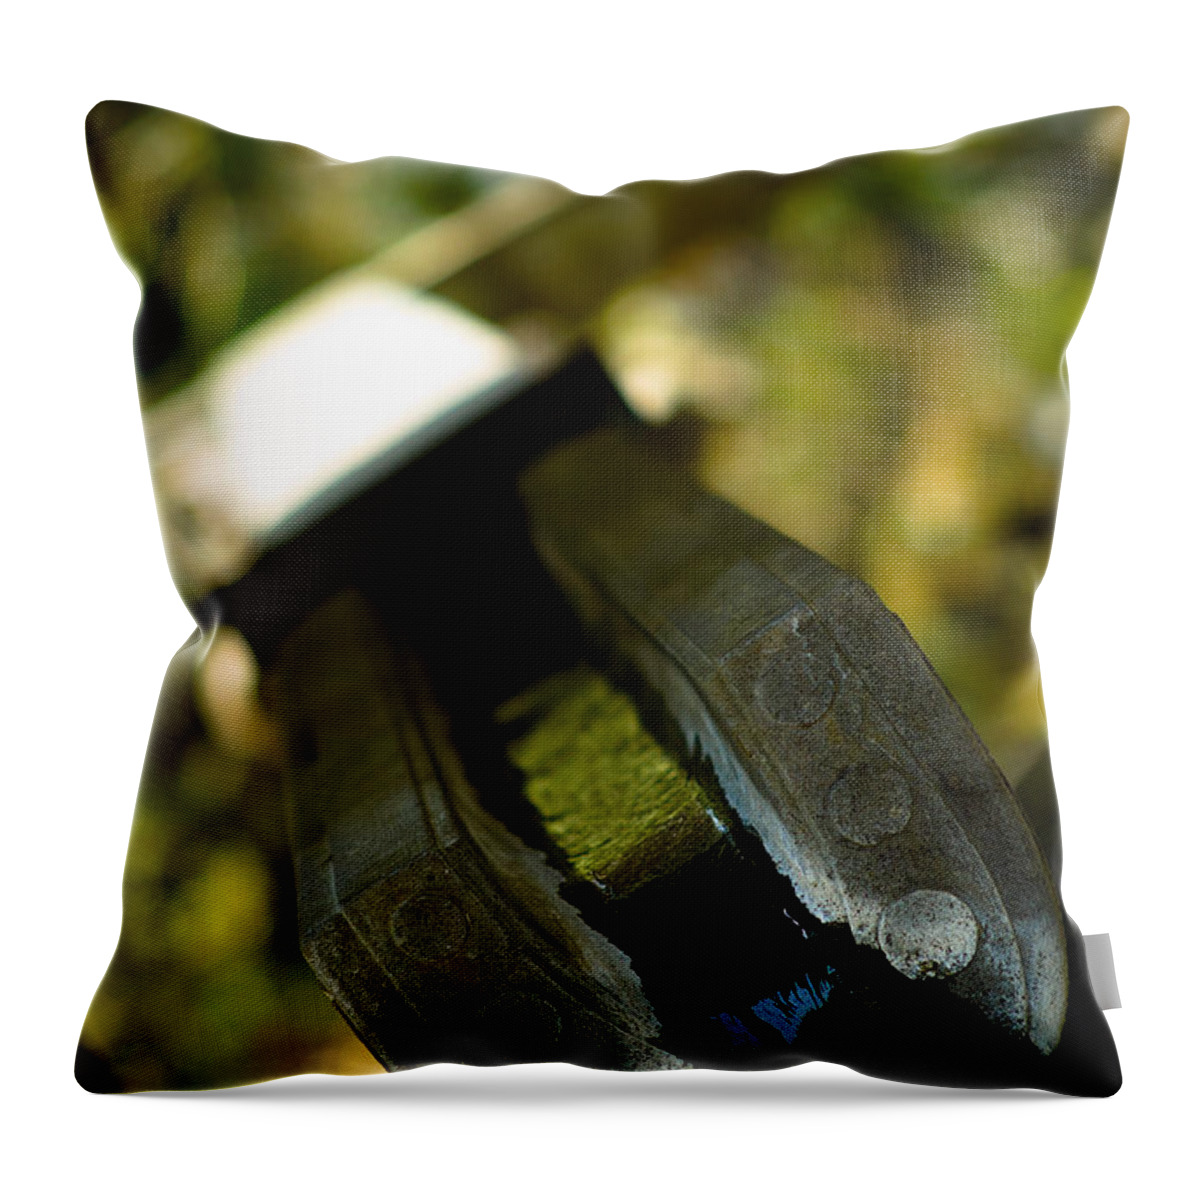 Japan Throw Pillow featuring the photograph Water Aqueduct by Sebastian Musial